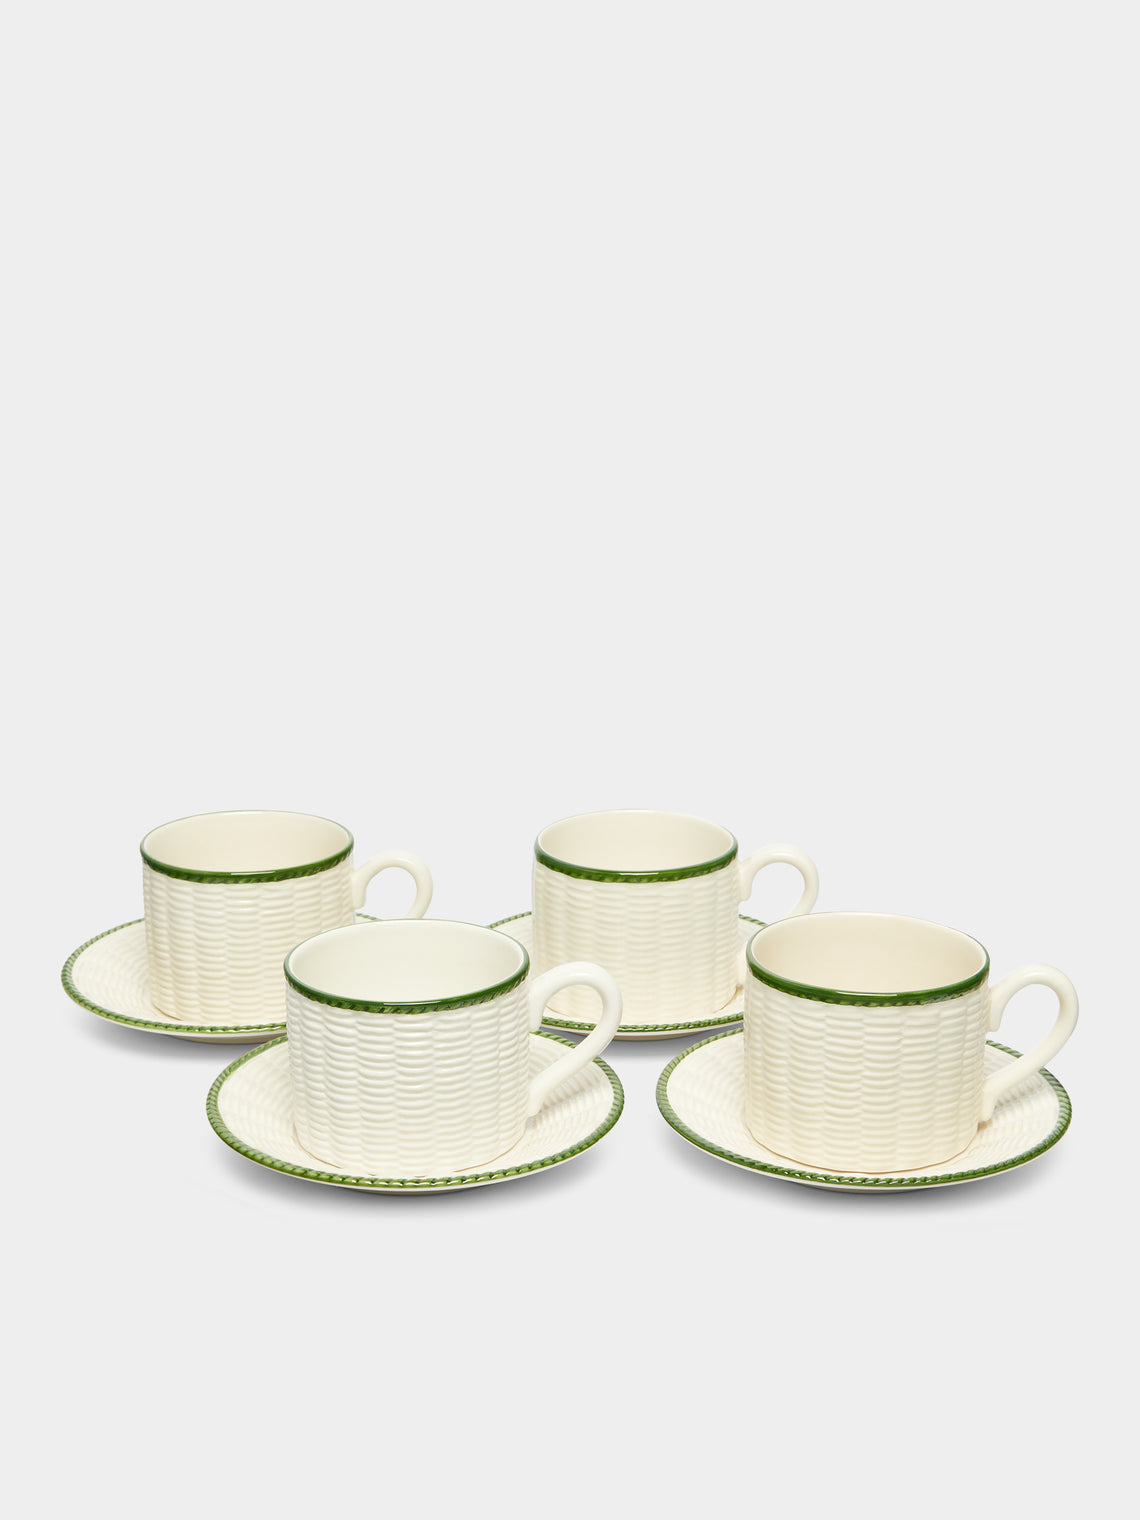 Este Ceramiche - Wicker Hand-Painted Ceramic Teacups and Saucers (Set of 4) -  - ABASK